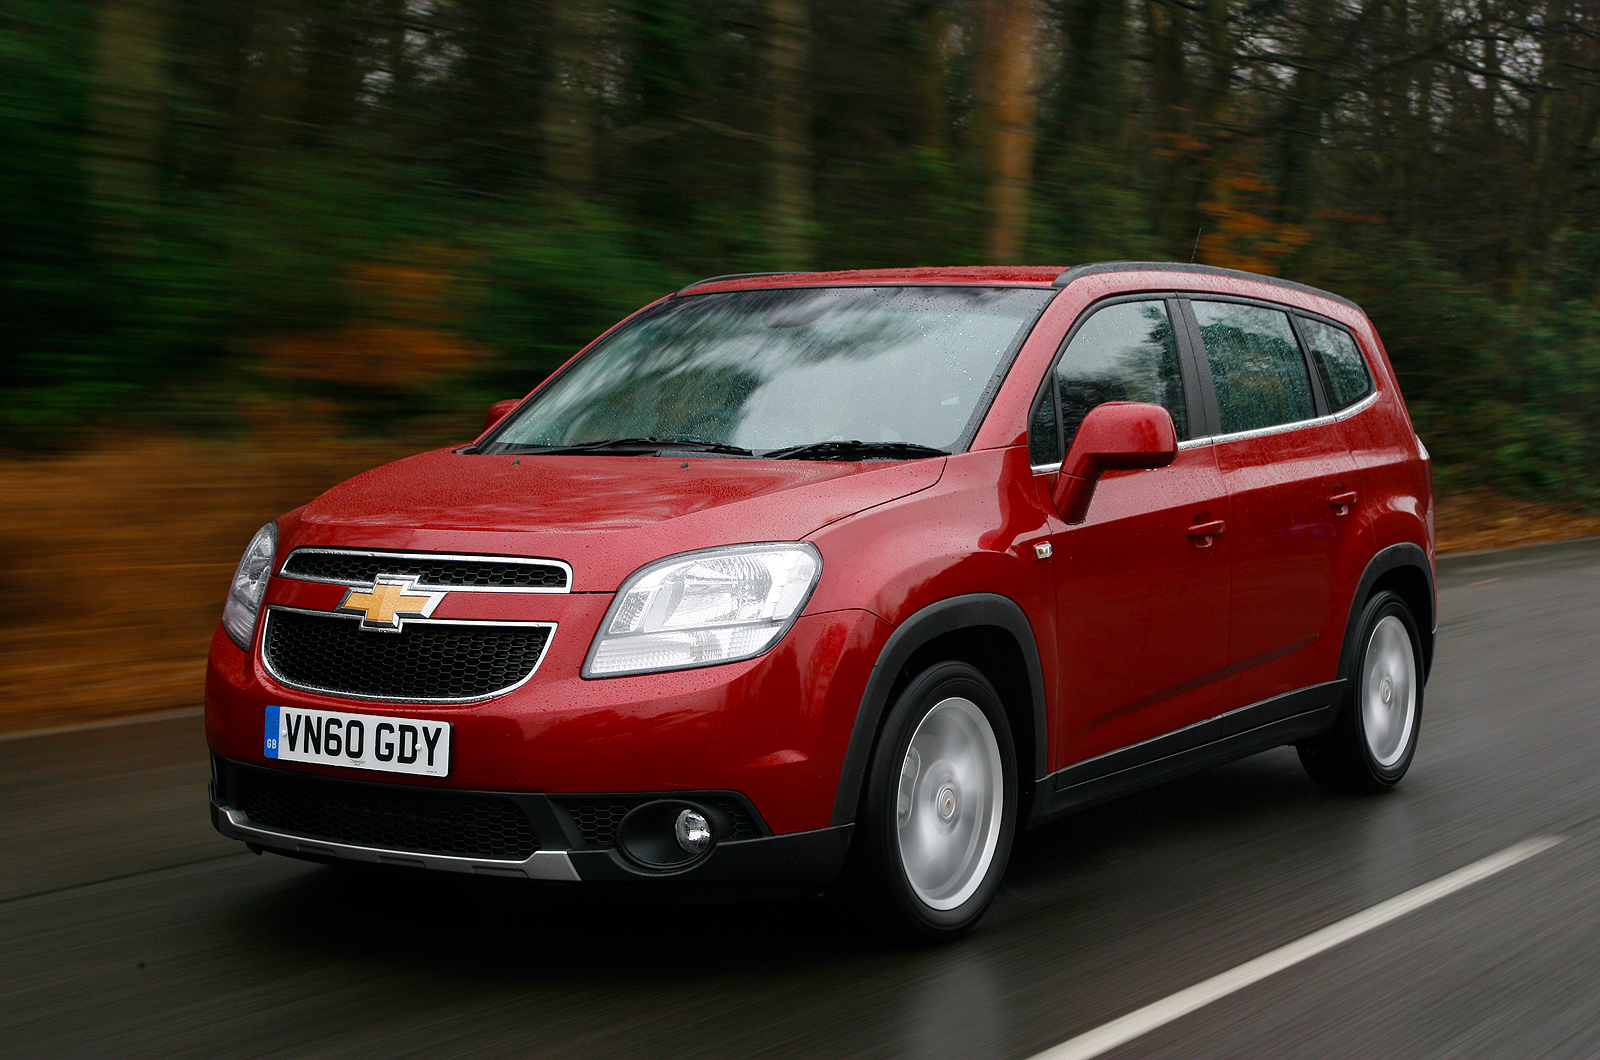 Used Chevrolet Orlando 2011-2015 review